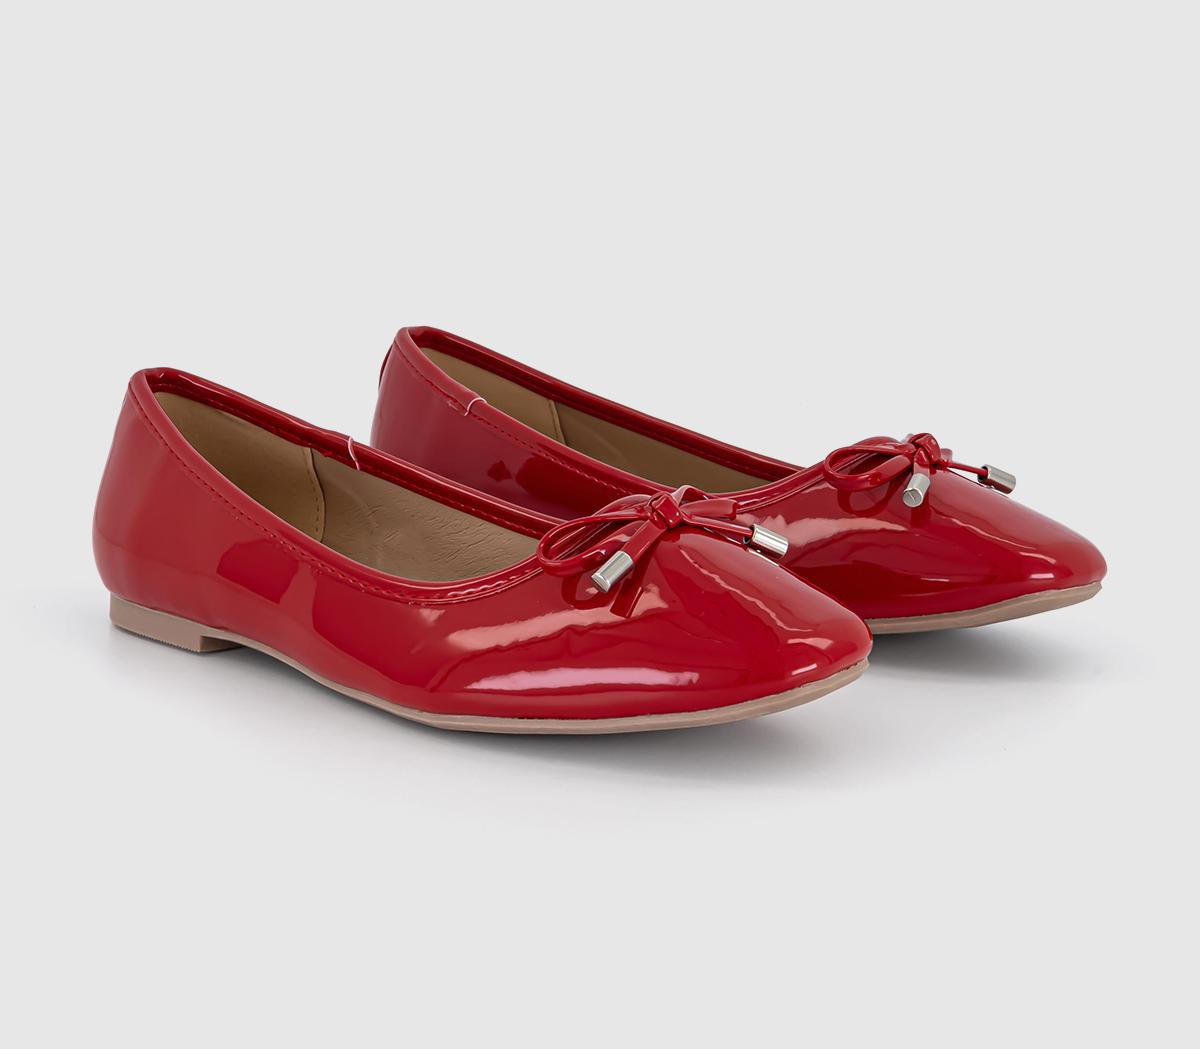 OFFICE Womens Flora Bow Detail Ballet Pumps Red Patent, 5